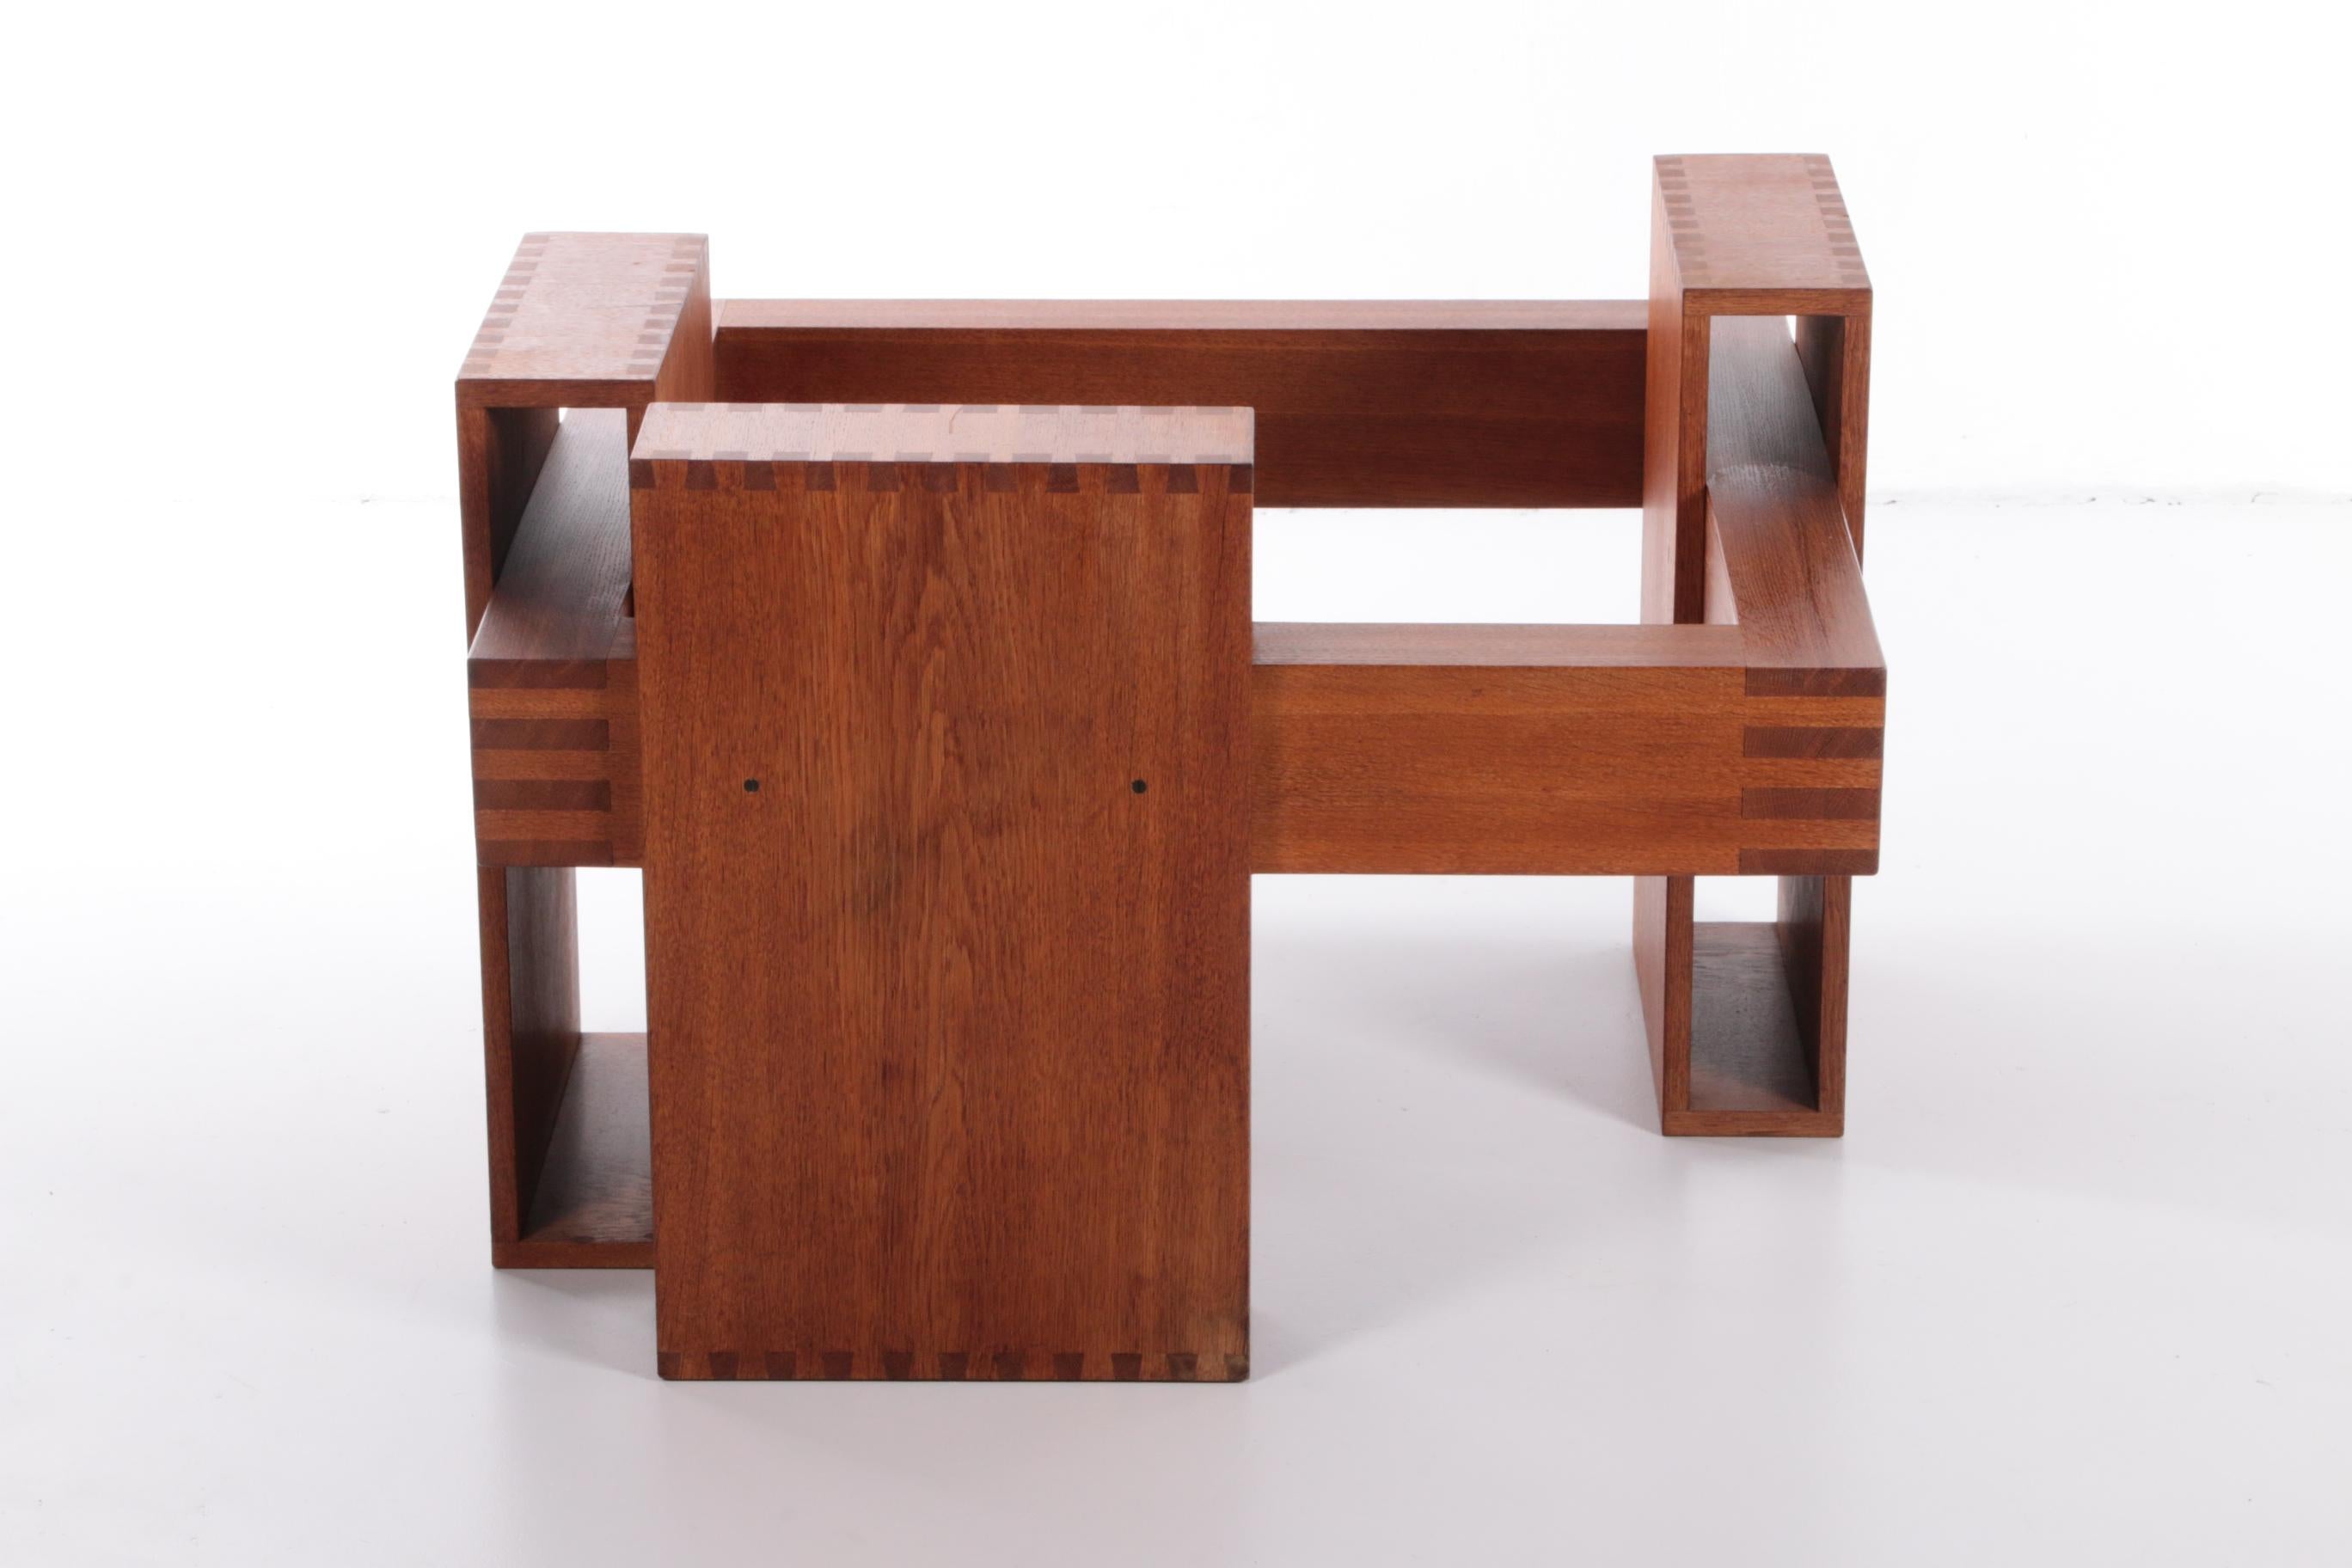 French Brutalist Design Coffee Table of Teak with Glass Top, 1970 For Sale 7